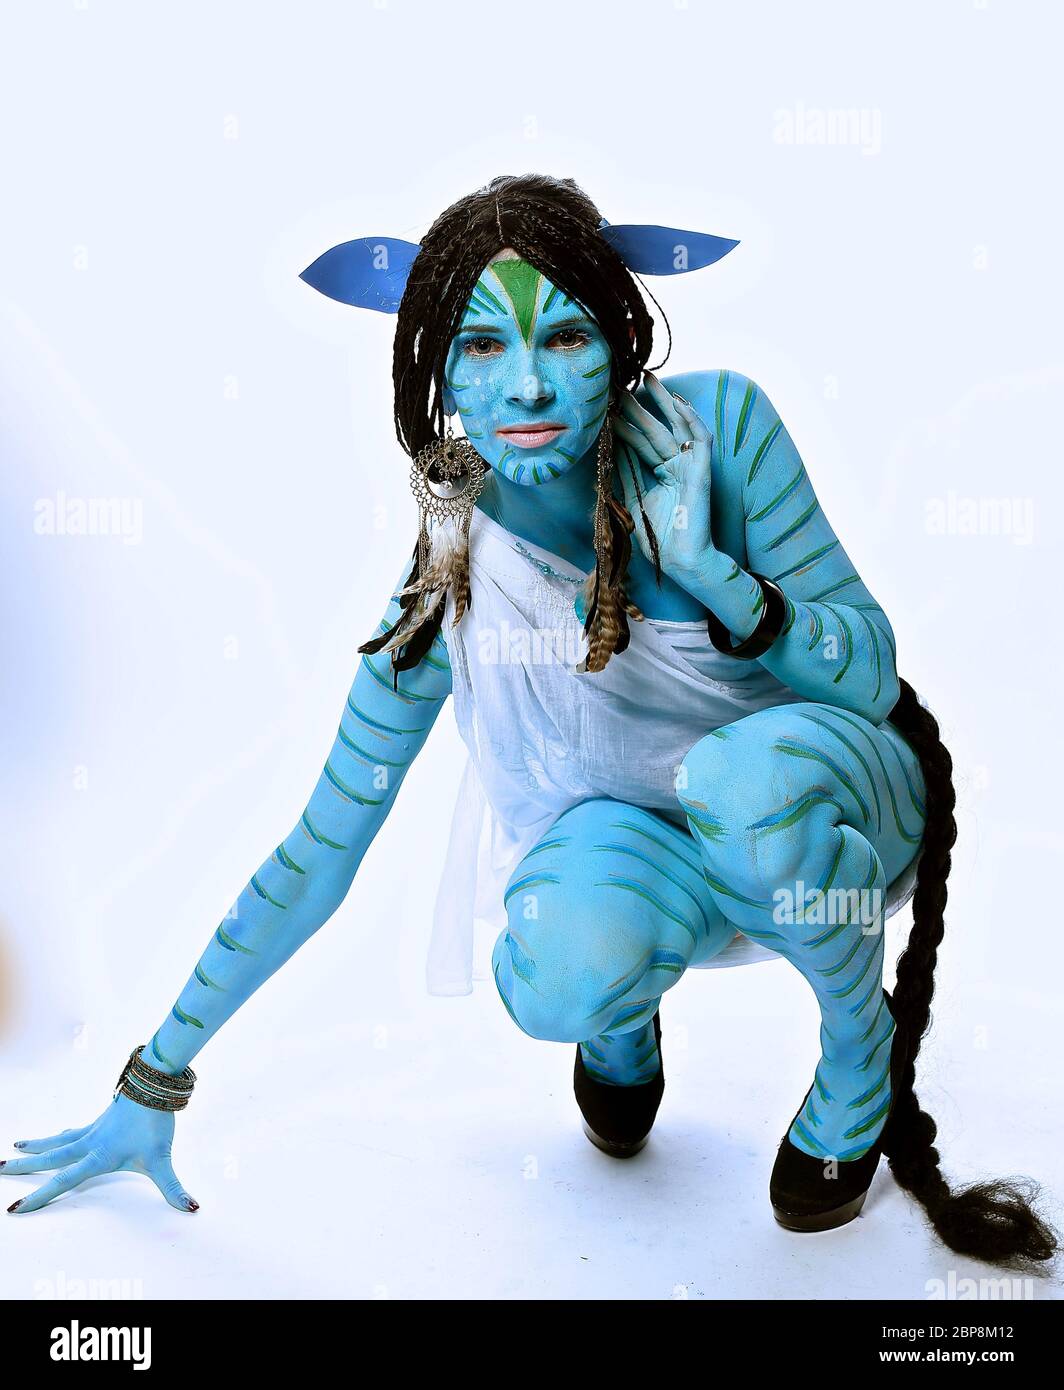 Development of Avatar began in 1994 , when Cameron wrote an 80 page treatment for the film .Fliming was supposed to take place after the compltion of Cameron's 1997 film Titanic , but according to Cameron , the necessary technology was not yet available to achieve his vision of the film .Cameron began developing the screenplay and fictional universe in early 2006 .The film made extensive use of new motion capture filming techniques , and was traditional viewing .£ D viewing and 4D  experiences in select South Korean theaters .The stereoscopic  film making was a breakthrough in technology ... Stock Photo